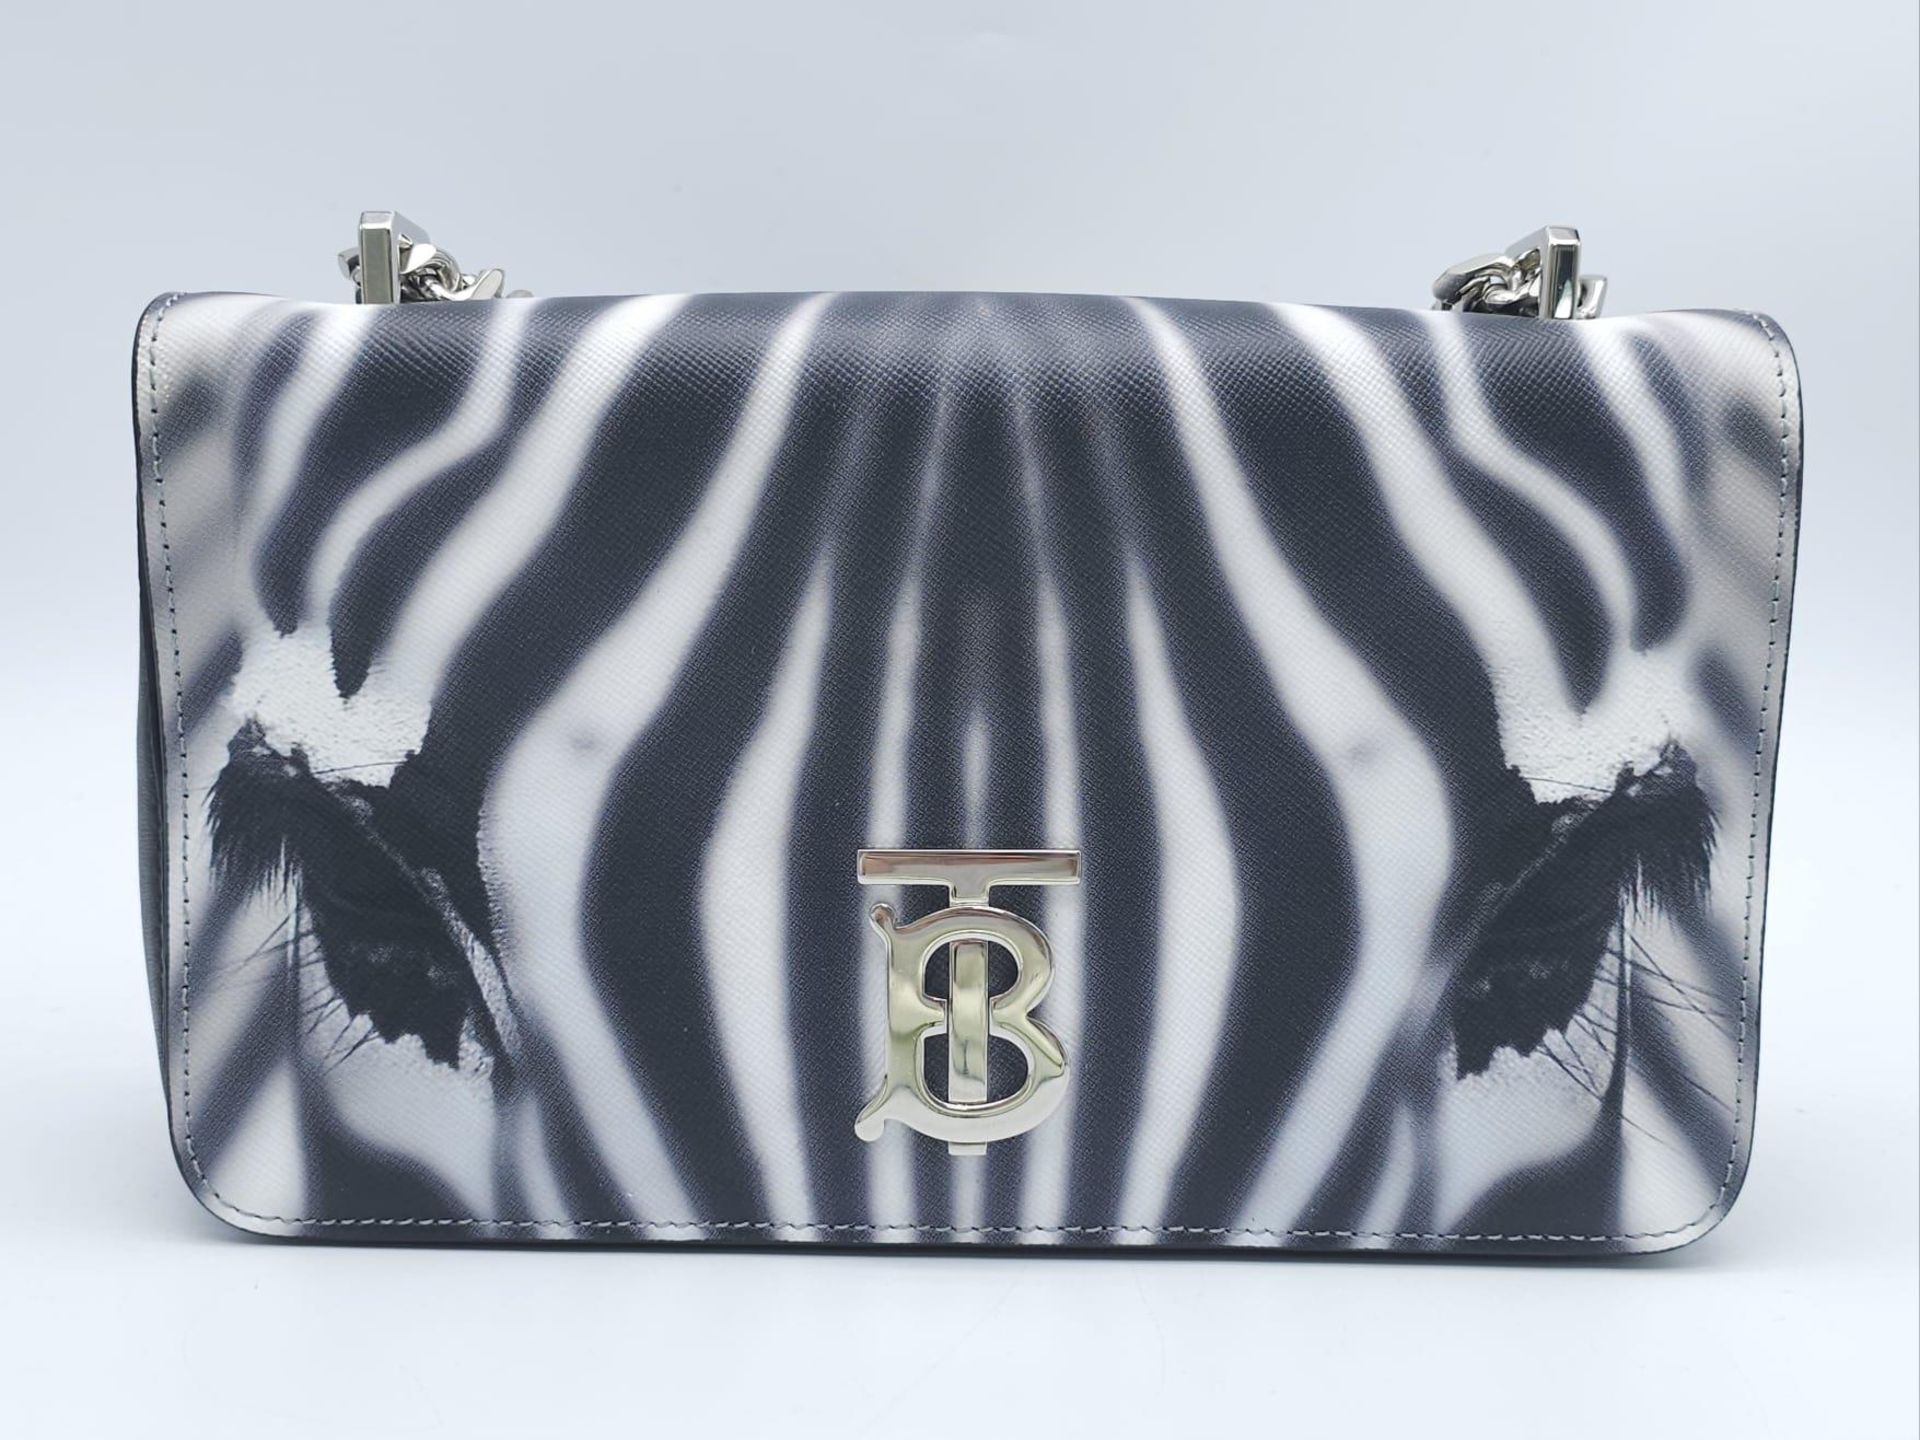 Burberry Zebra Chain Shoulder Bag. Quality leather throughout with a gorgeous print of a Zebra.